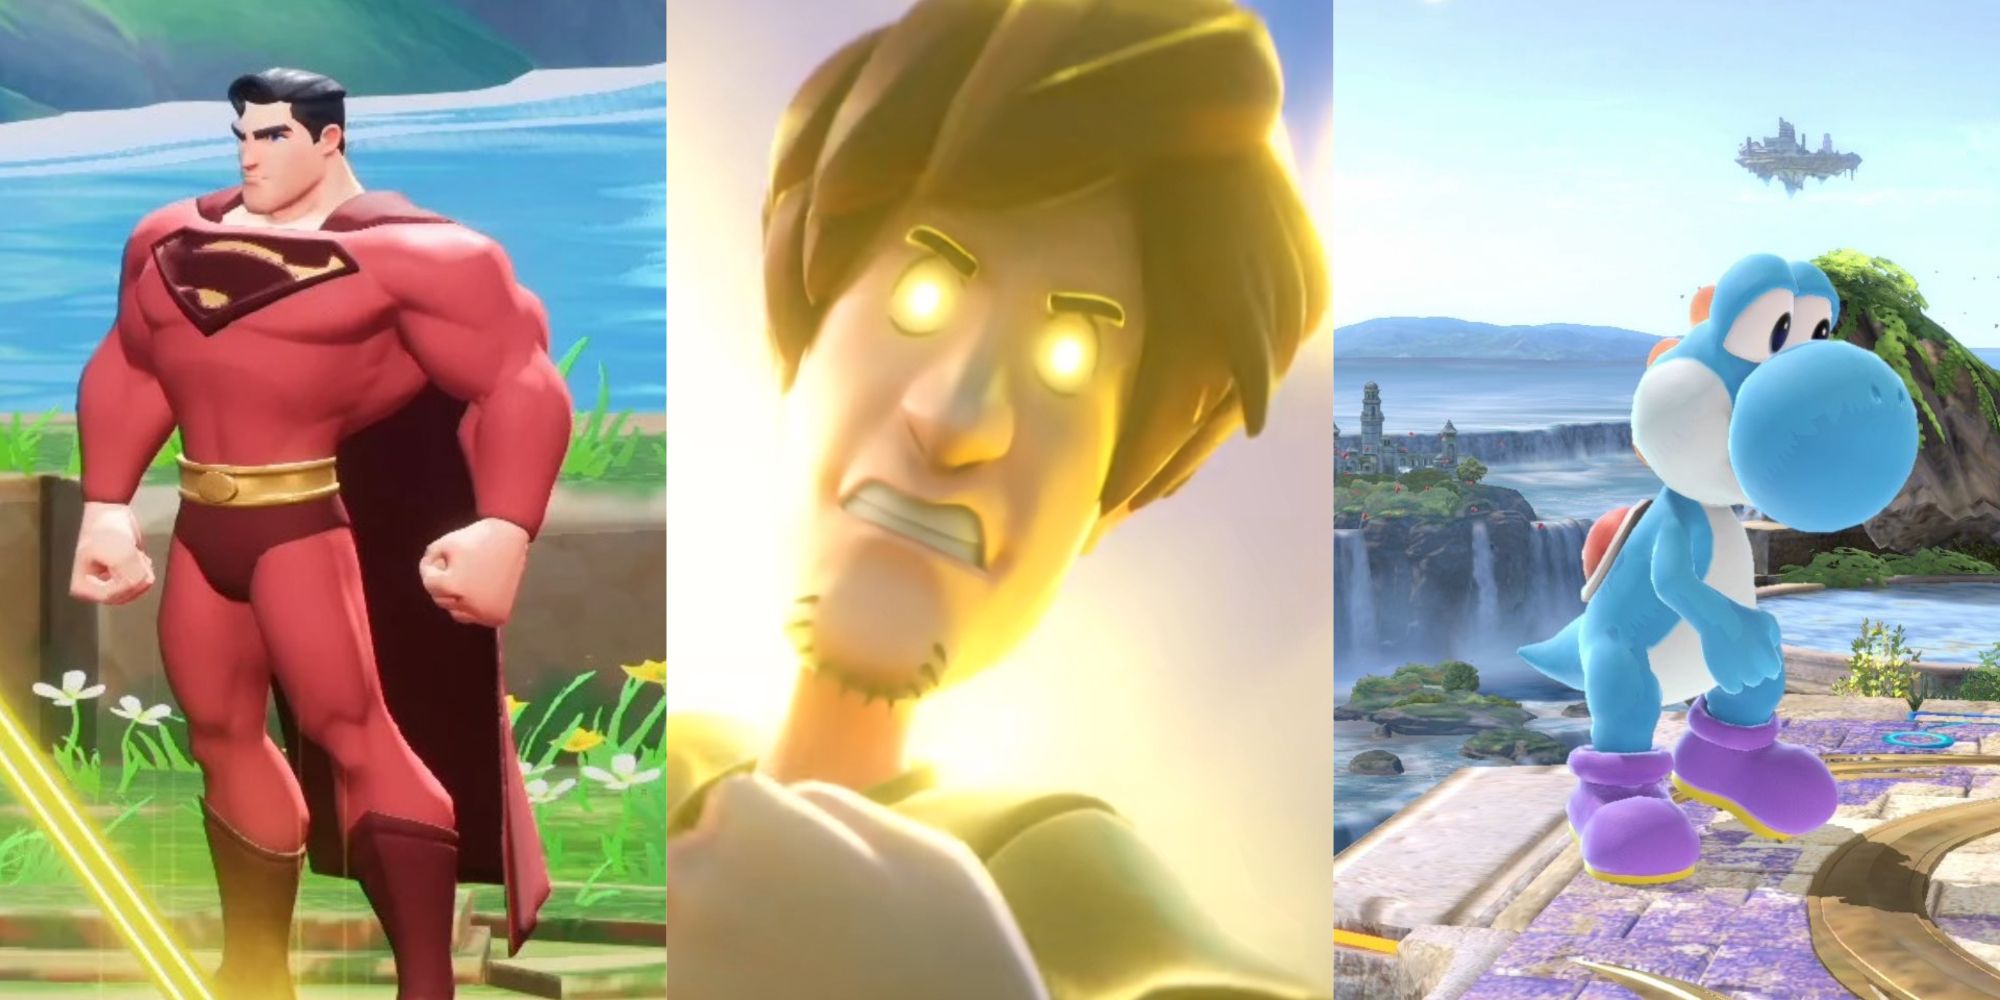 A split image of MultiVersus and Smash Bros